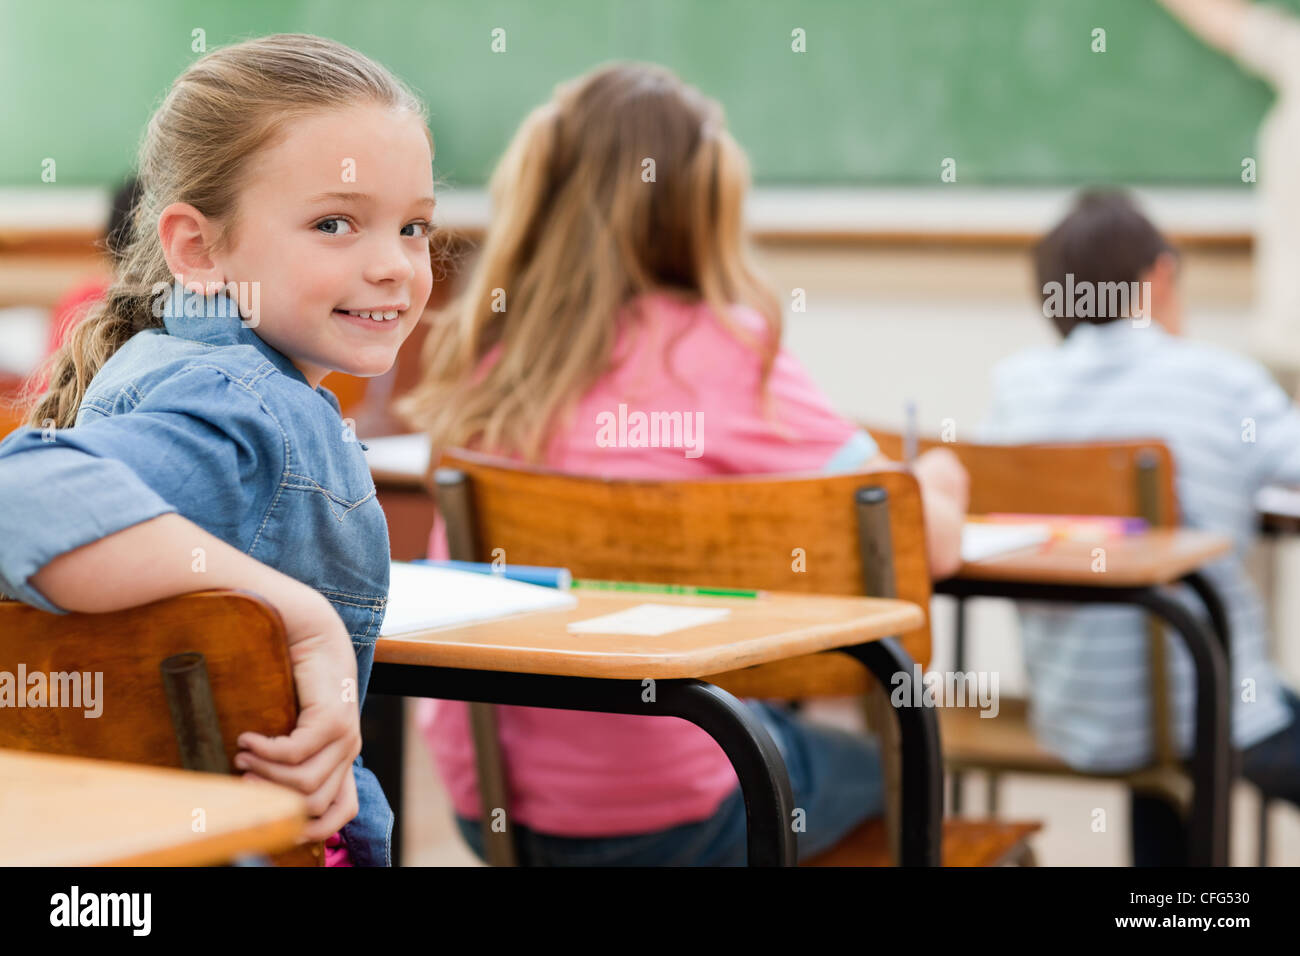 Primary student turned around during class Stock Photo